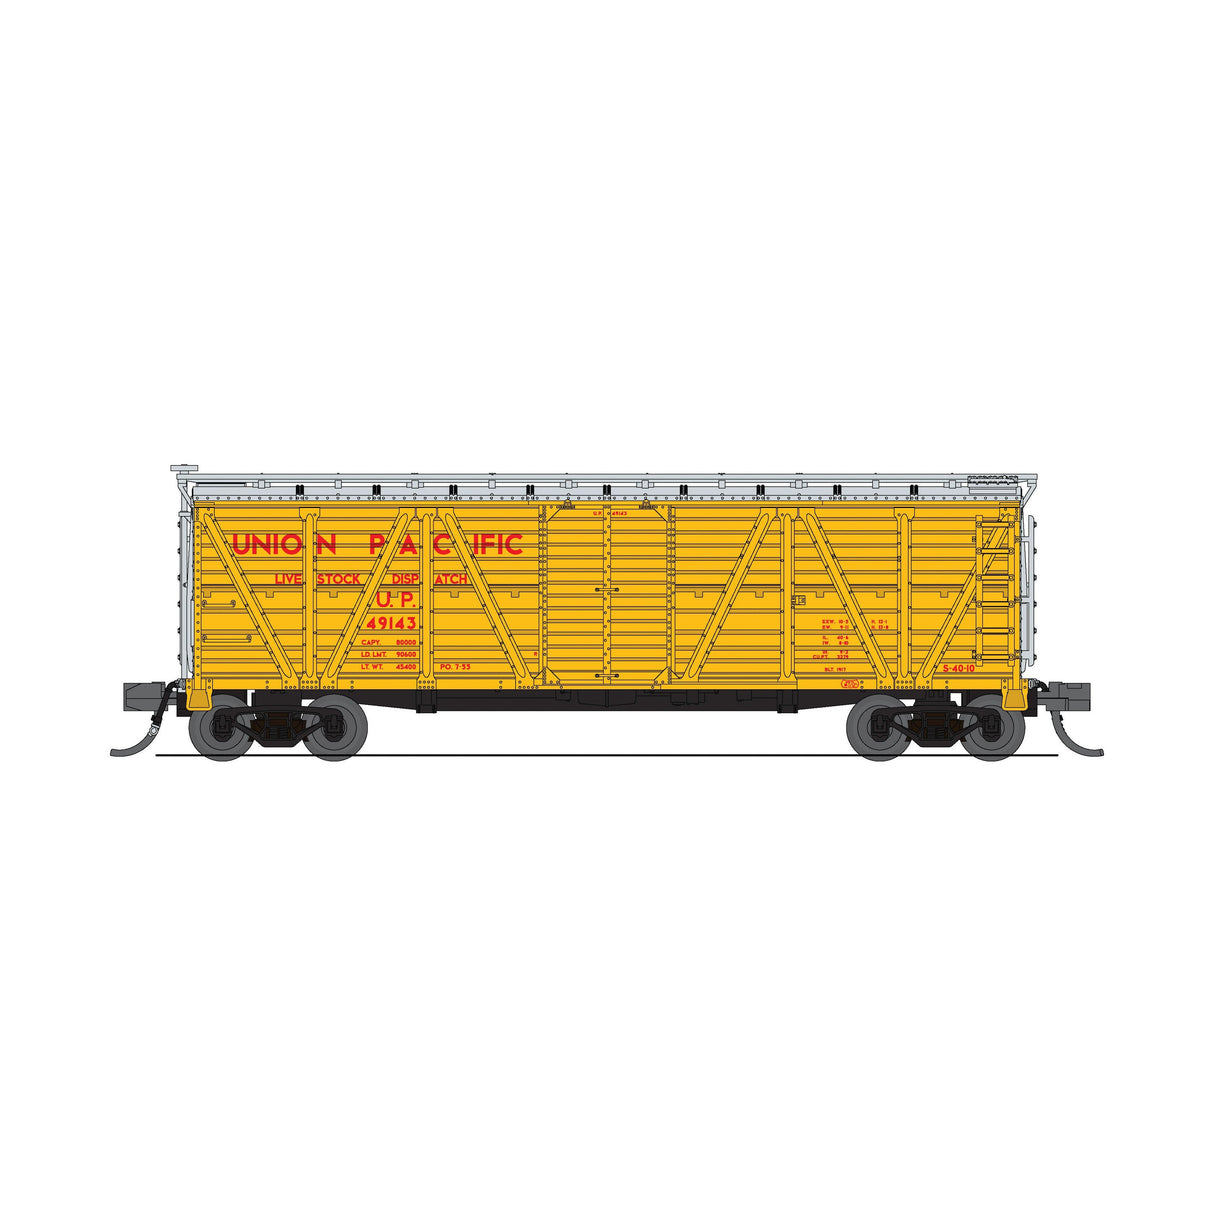 Broadway Limited N Scale Stock Car 2 Pack Union Pacific UP